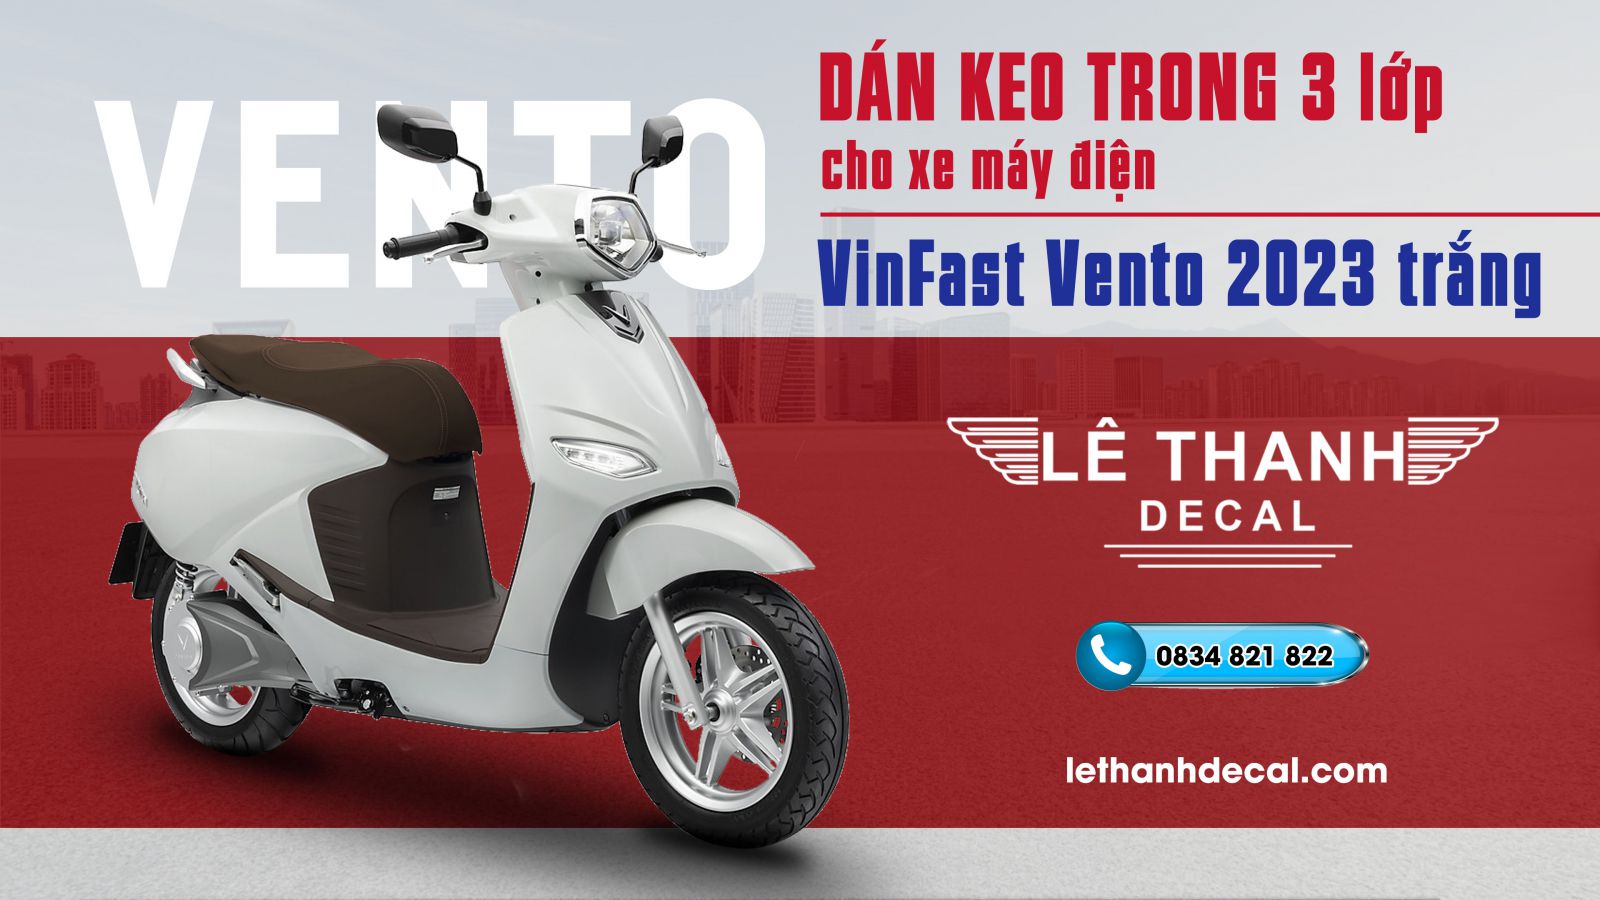 ​ Dán keo trong 3 lớp cho xe VinFast Vento 2023 trắng ngọc trai   Click and drag to move ​